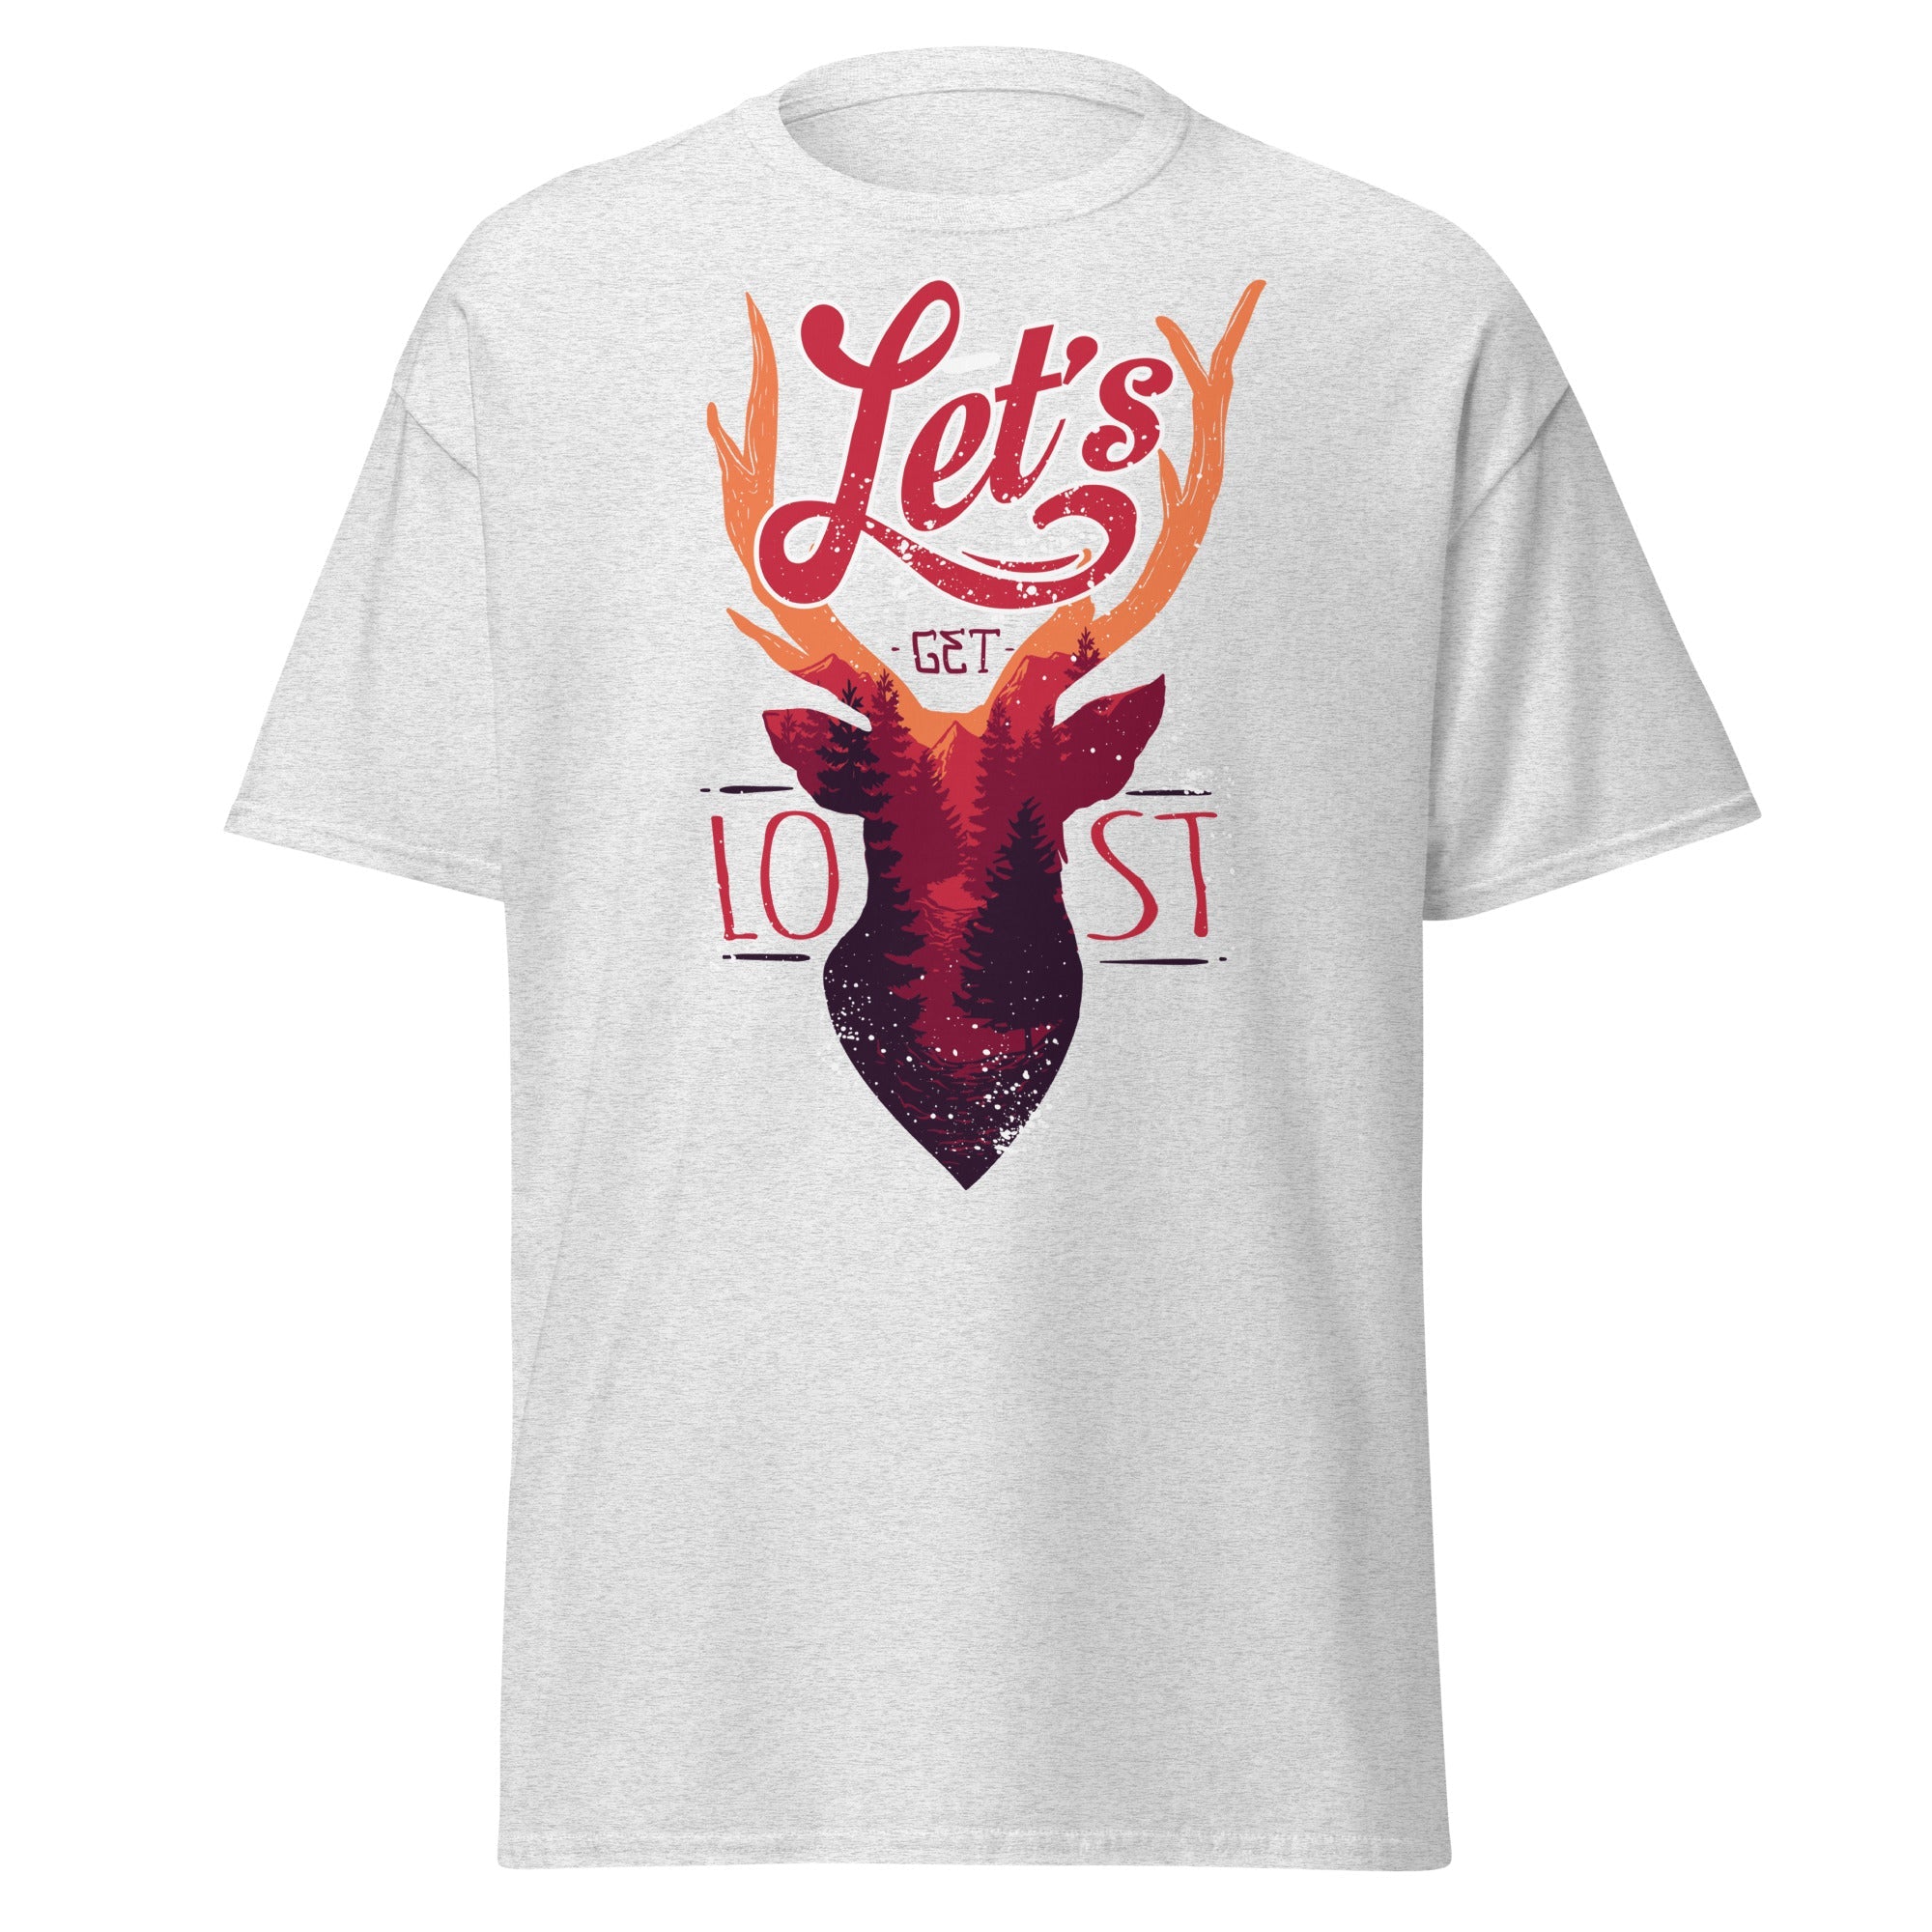 Lets Get Lost Mens Graphic Tee - Kicks Shoelaces